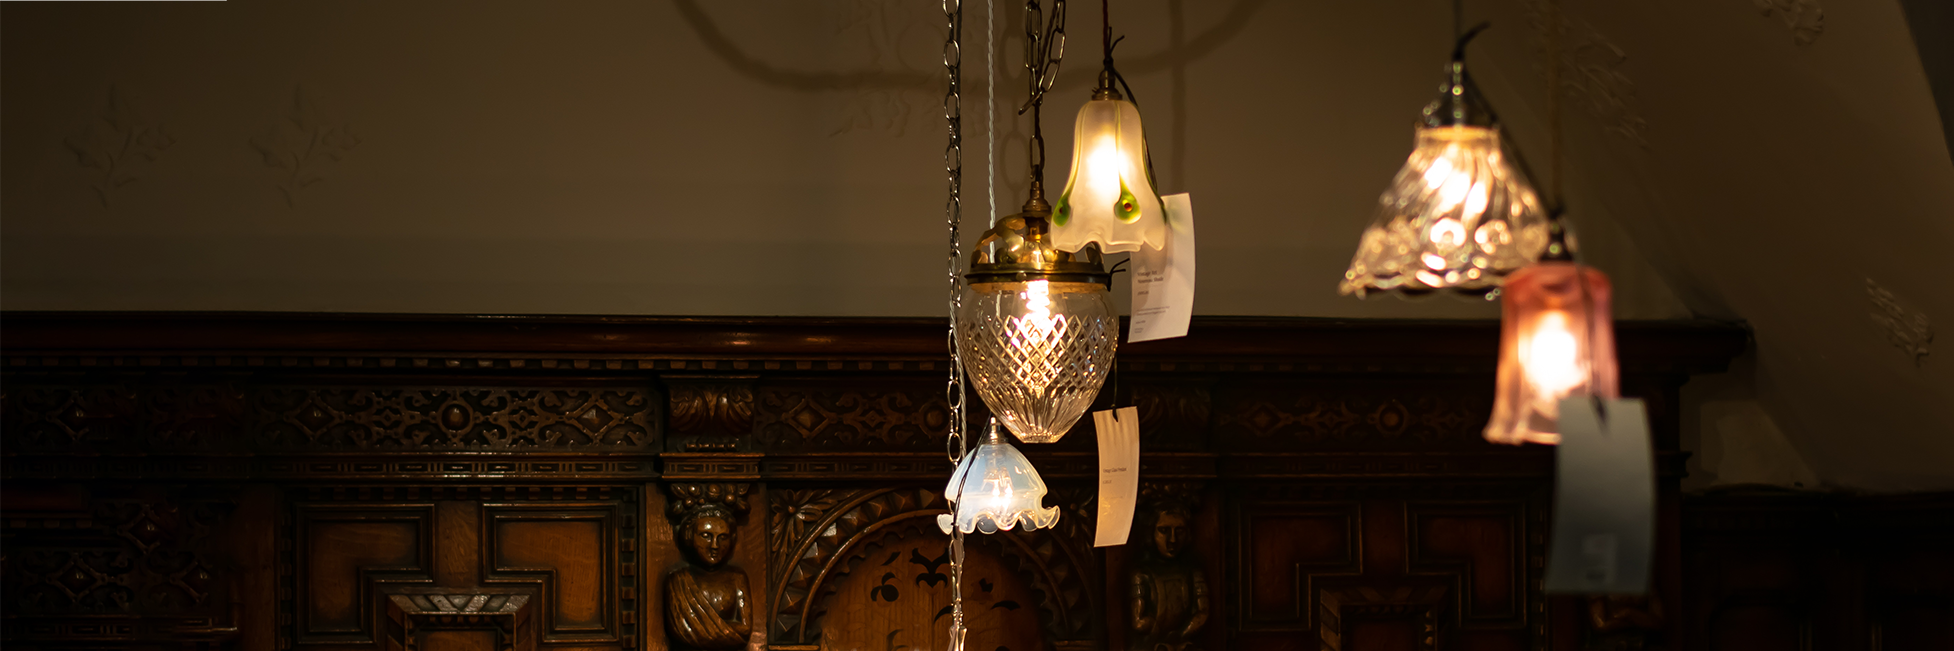 Antique ceiling lights hung together in a pretty display with eau de nil and cut glass shades